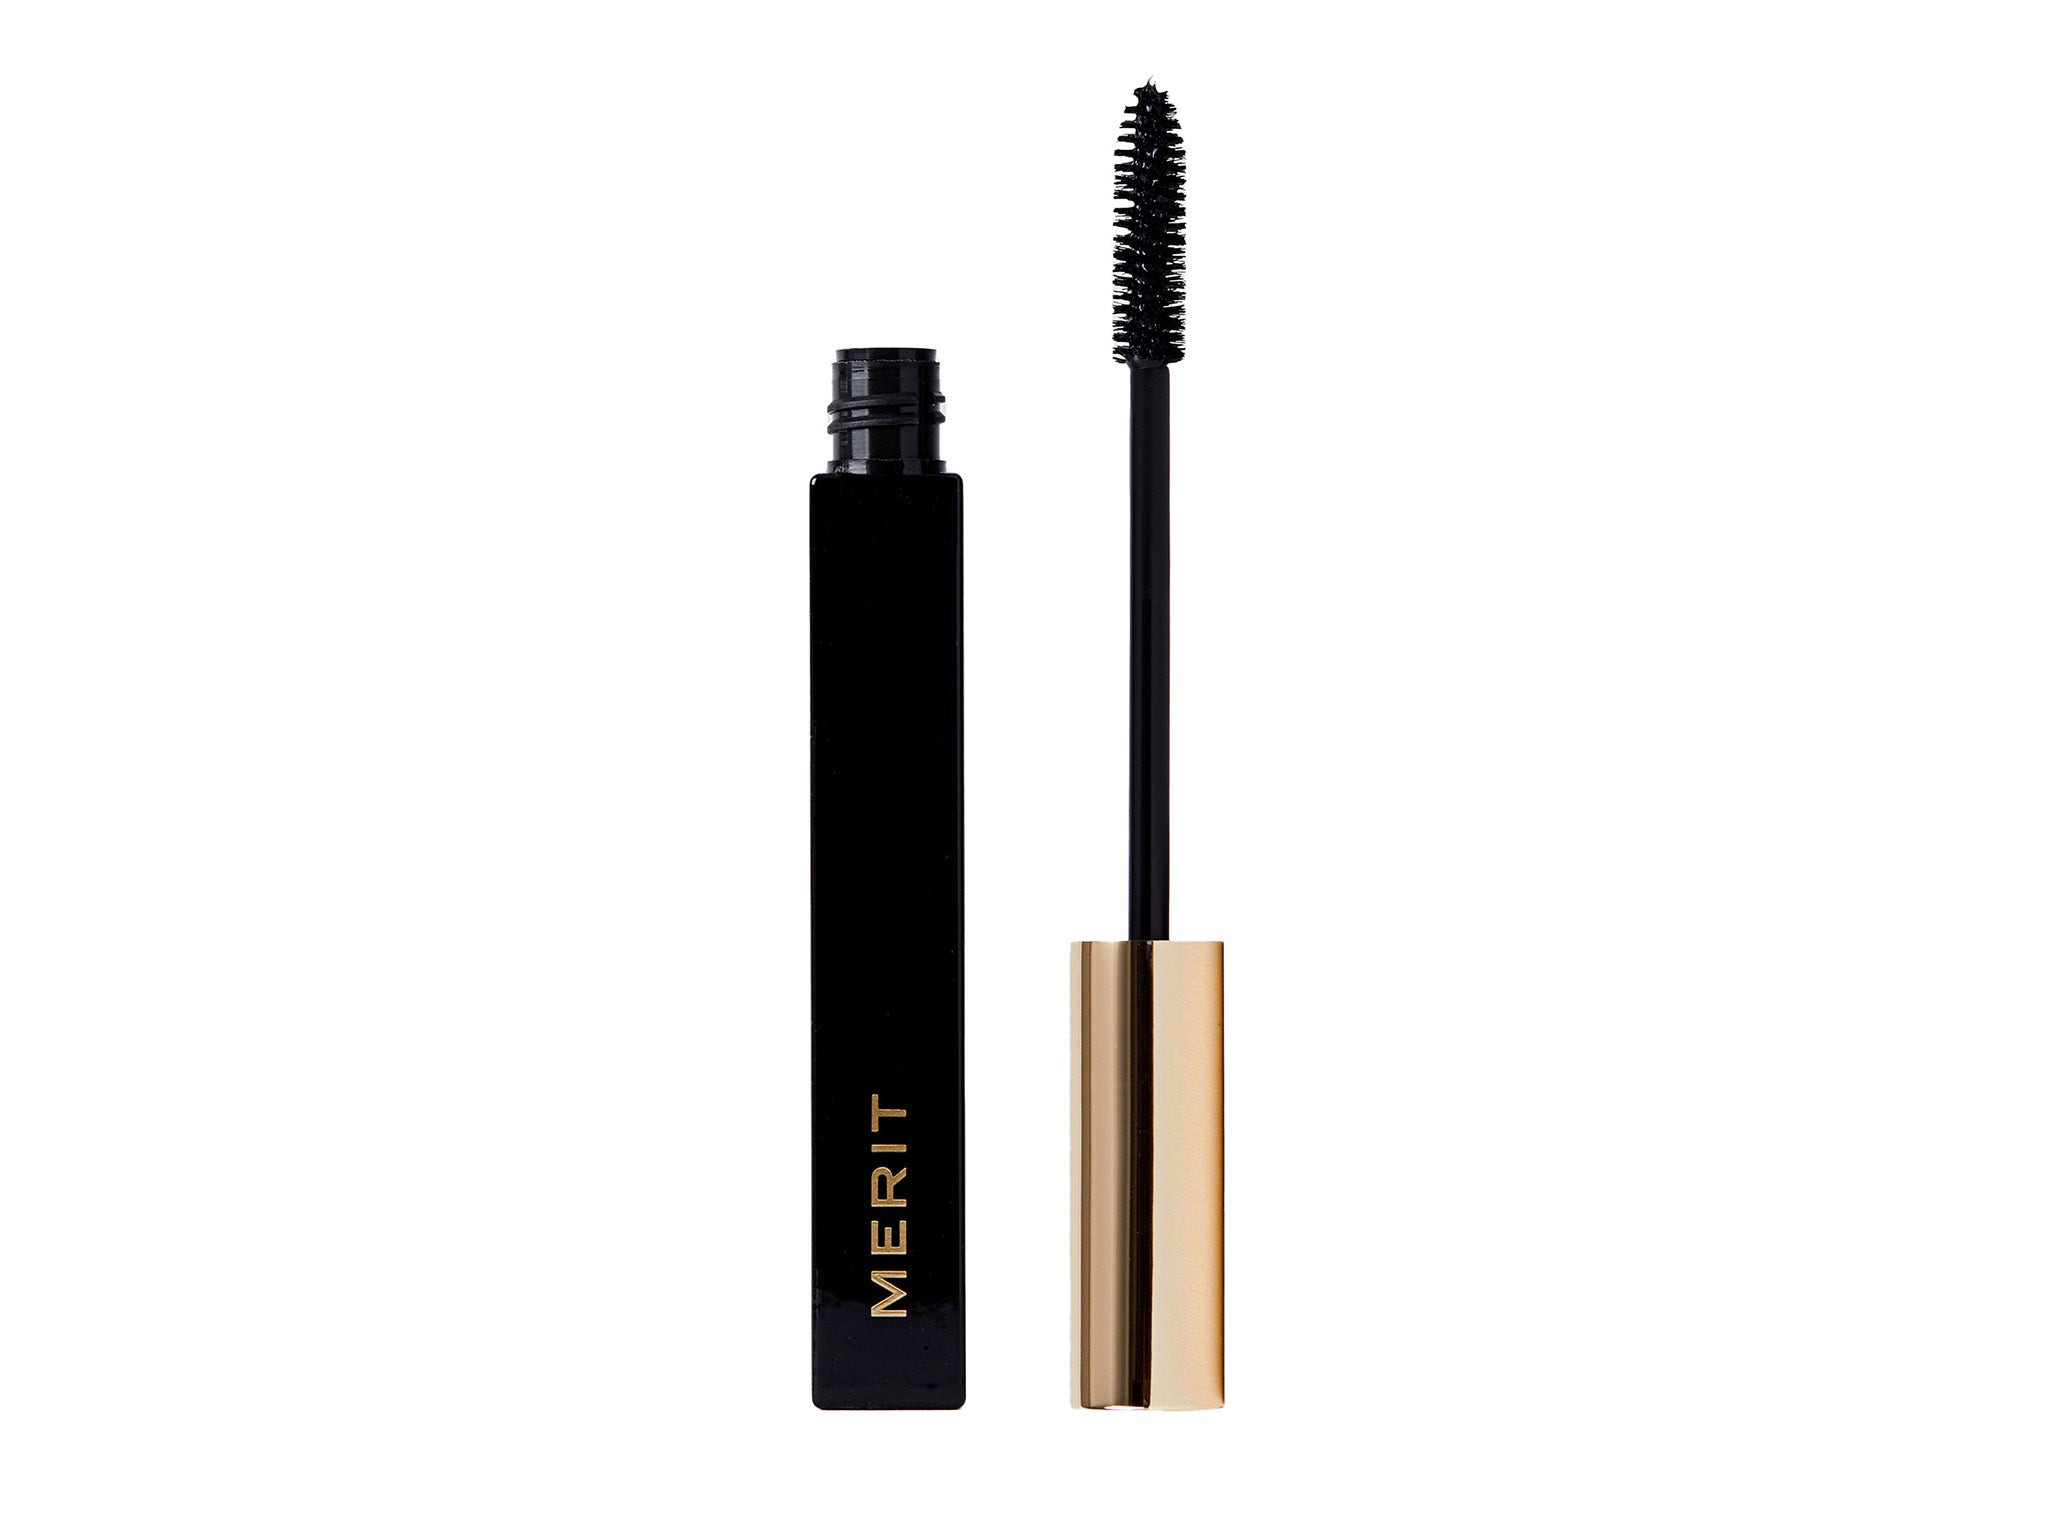 Bliv ophidset mor Konsekvent Best mascara 2023: For long, full lashes with volume | The Independent